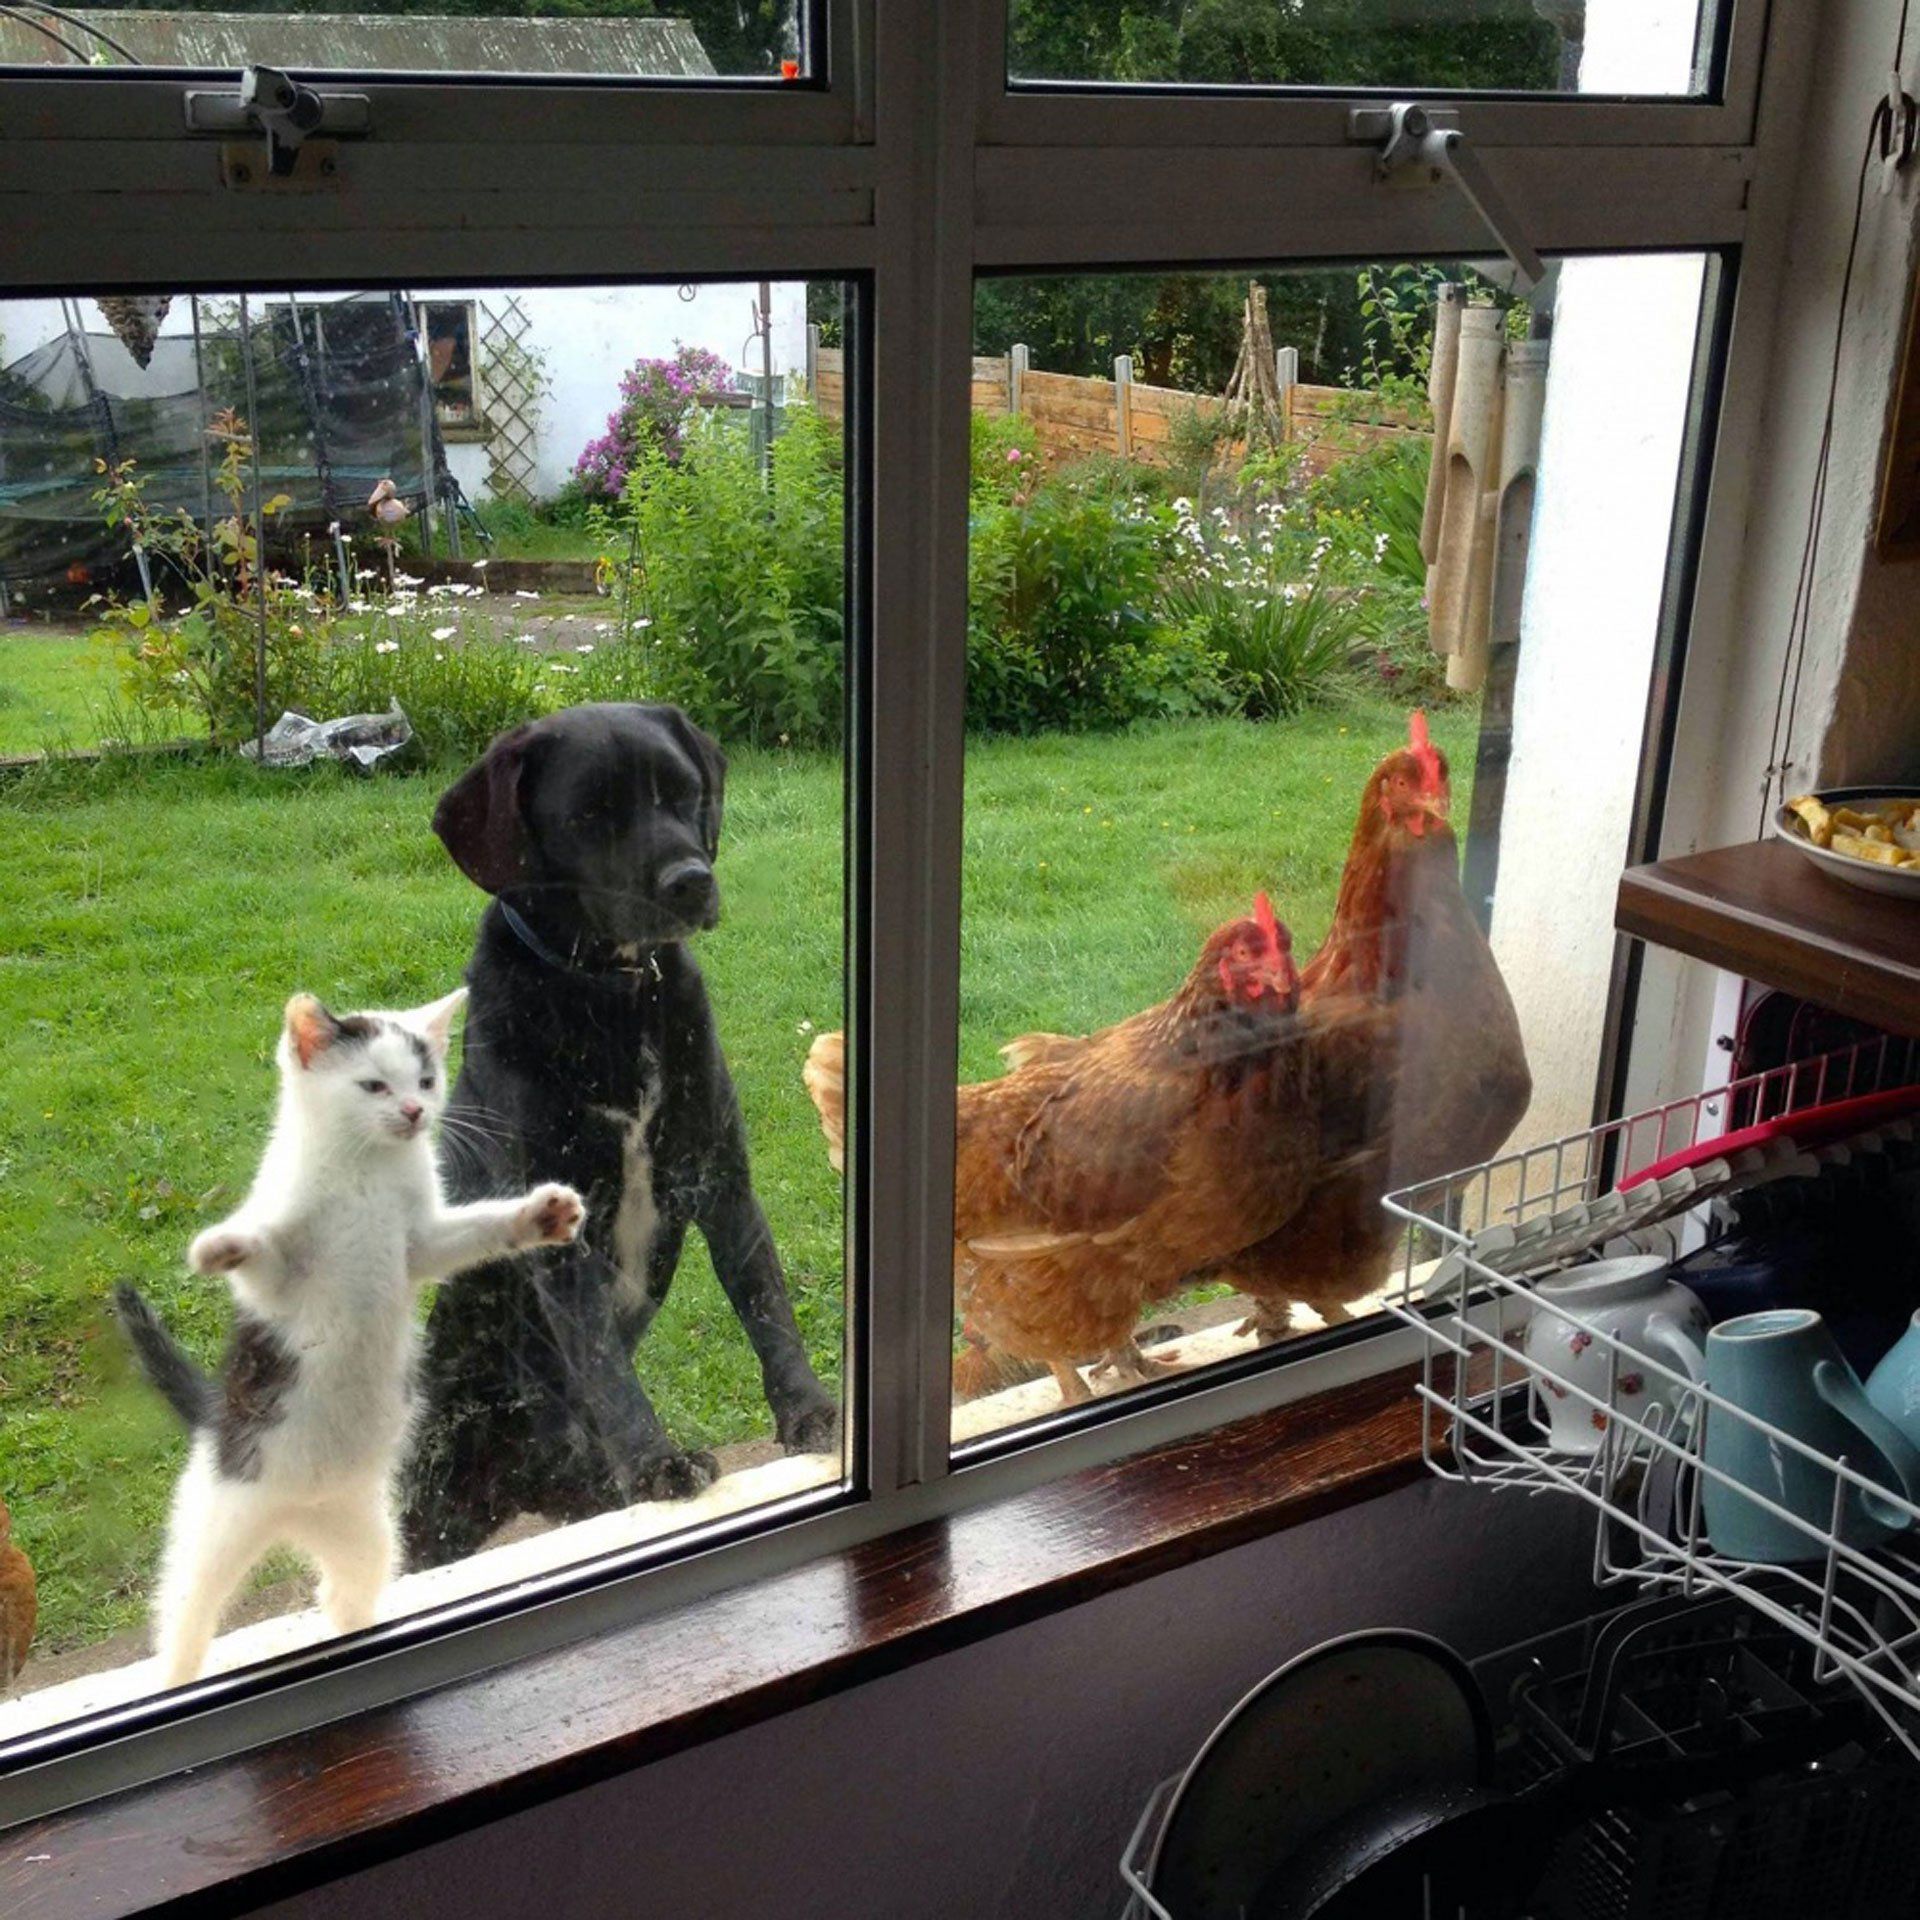 Animals want to get inside